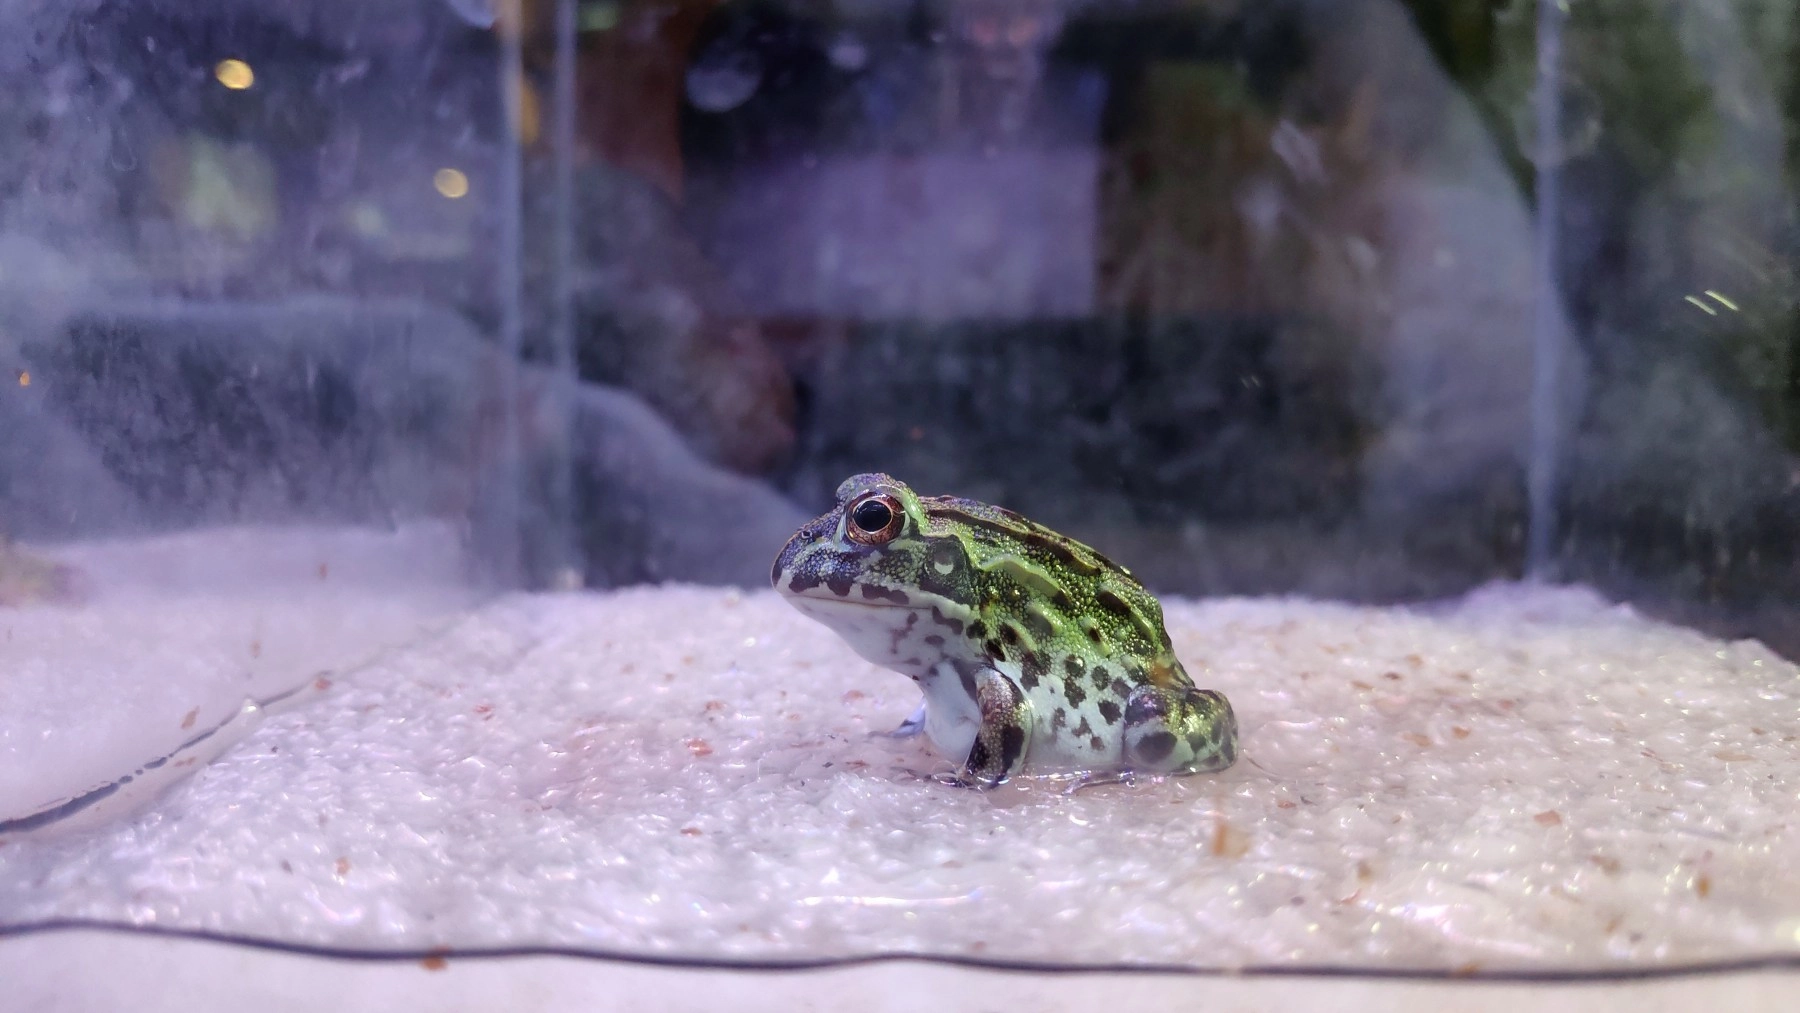 A Pacman frog in a tank